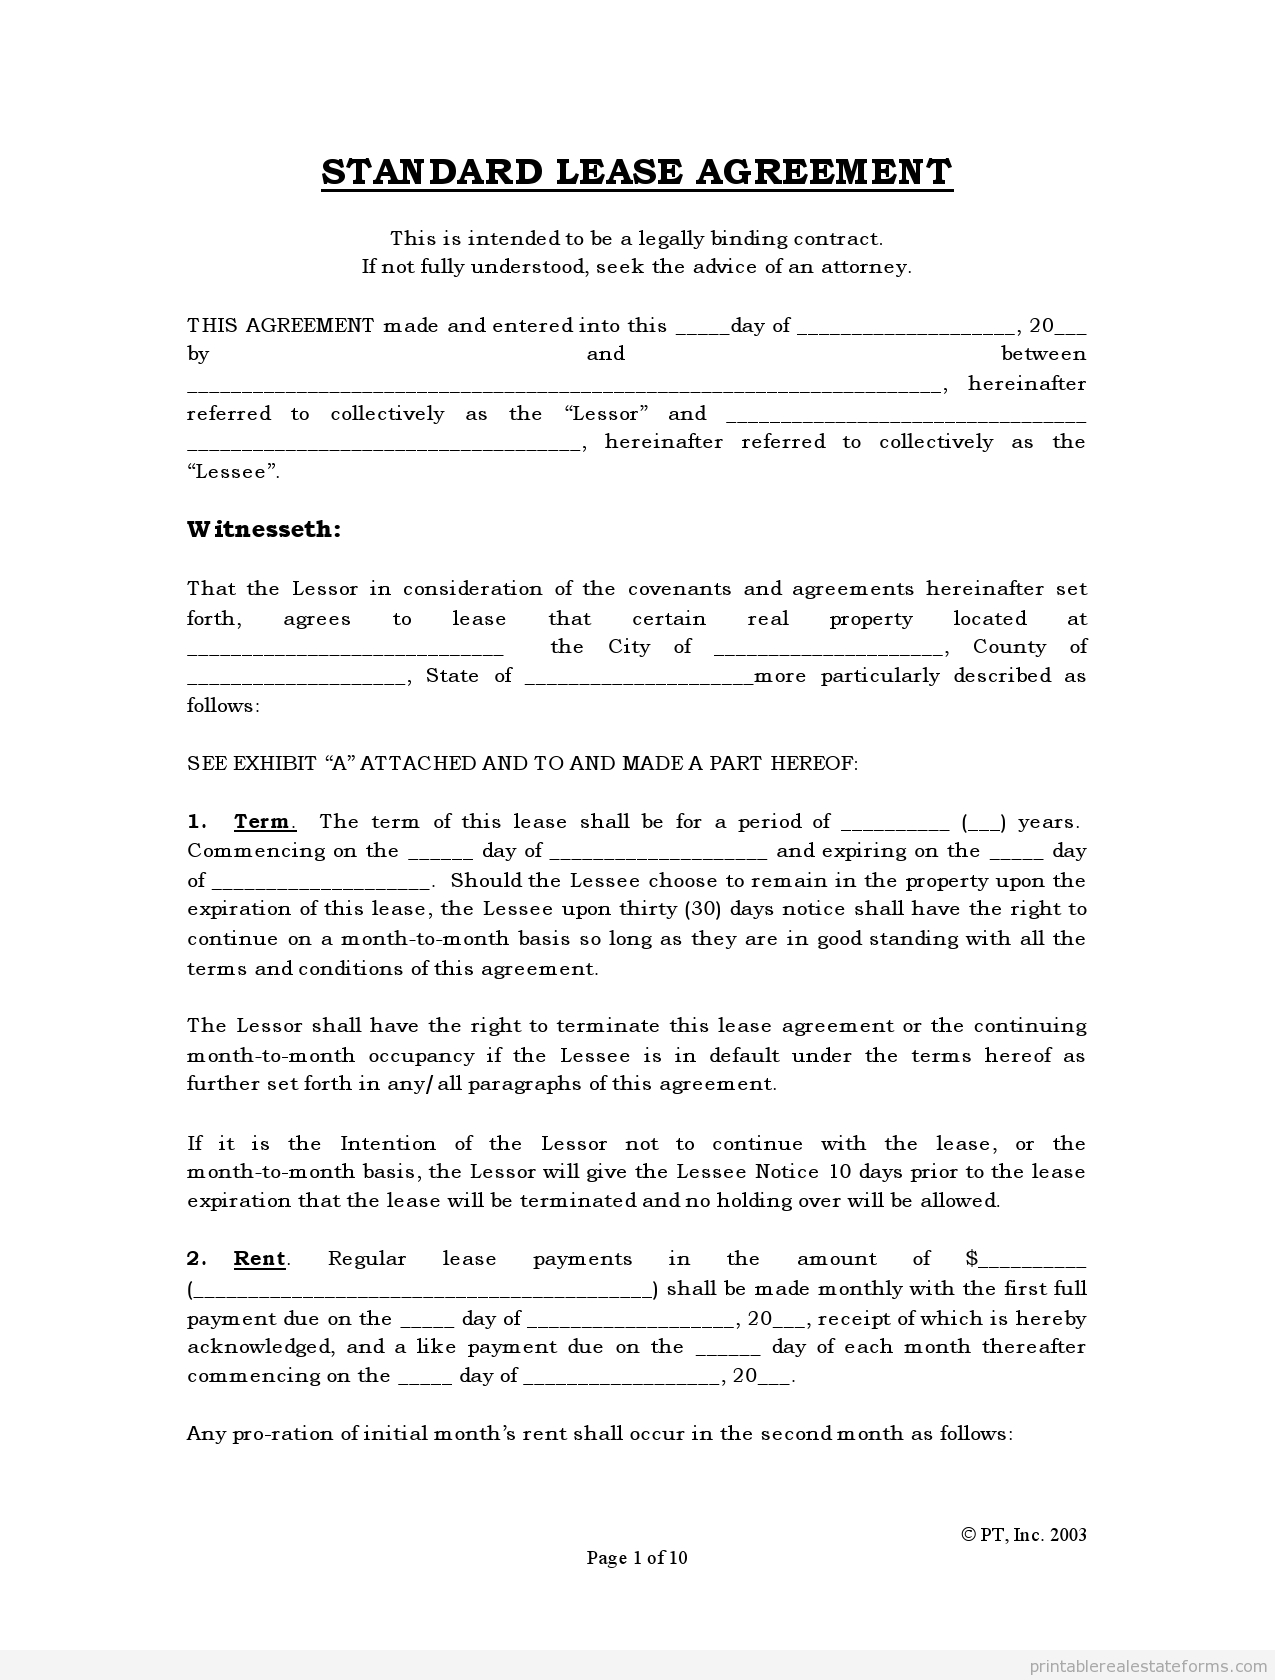 Free Rental Agreements To Print | Free Standard Lease Agreement Form - Free Printable Will Papers